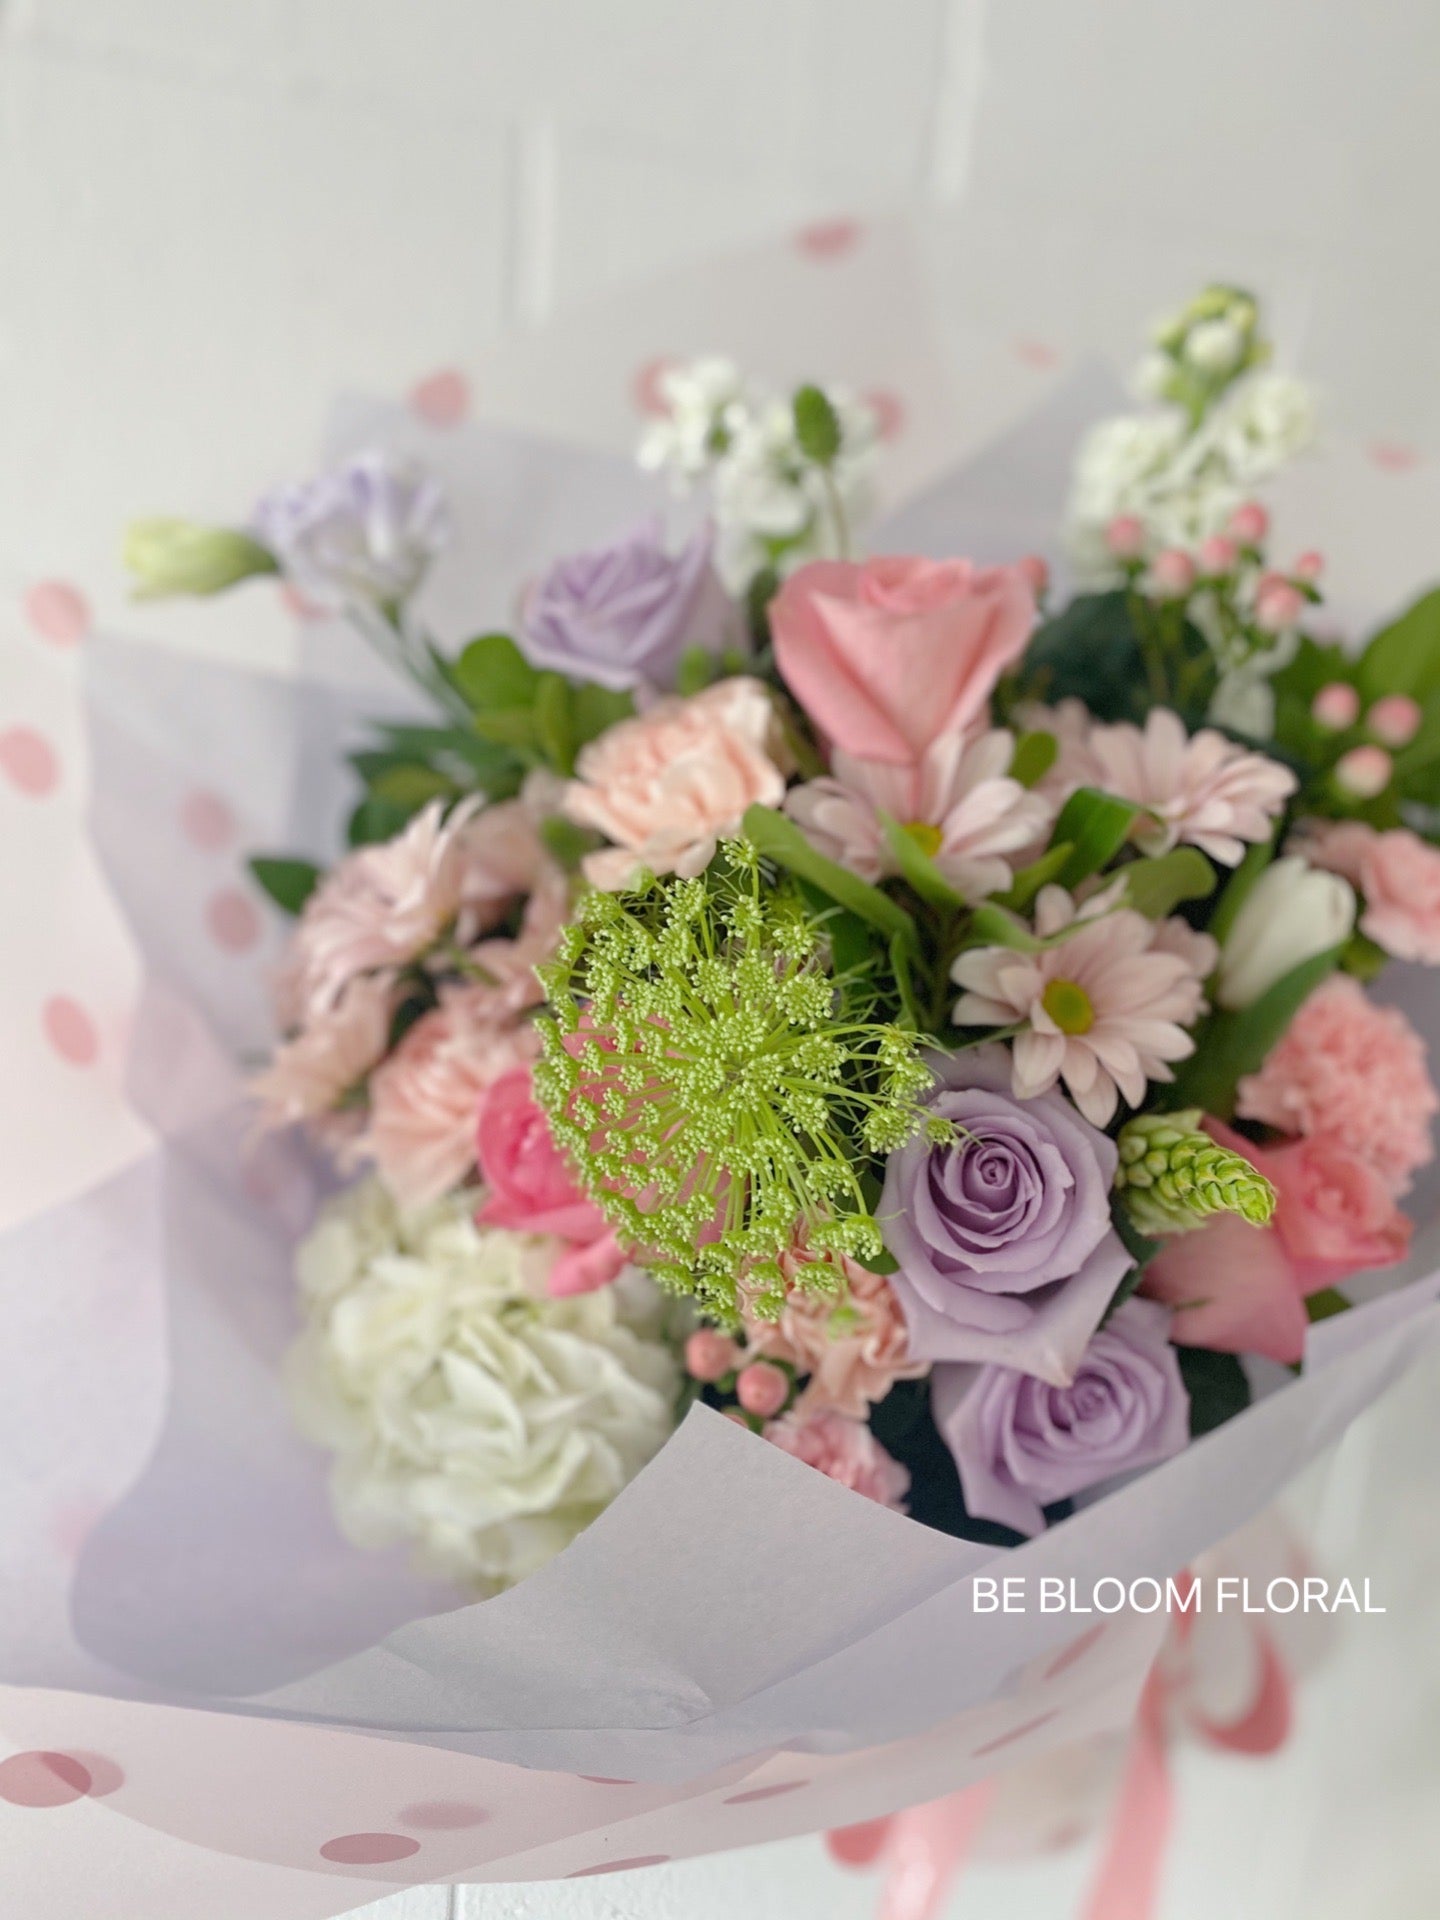 Mother's Day Special Bouquet